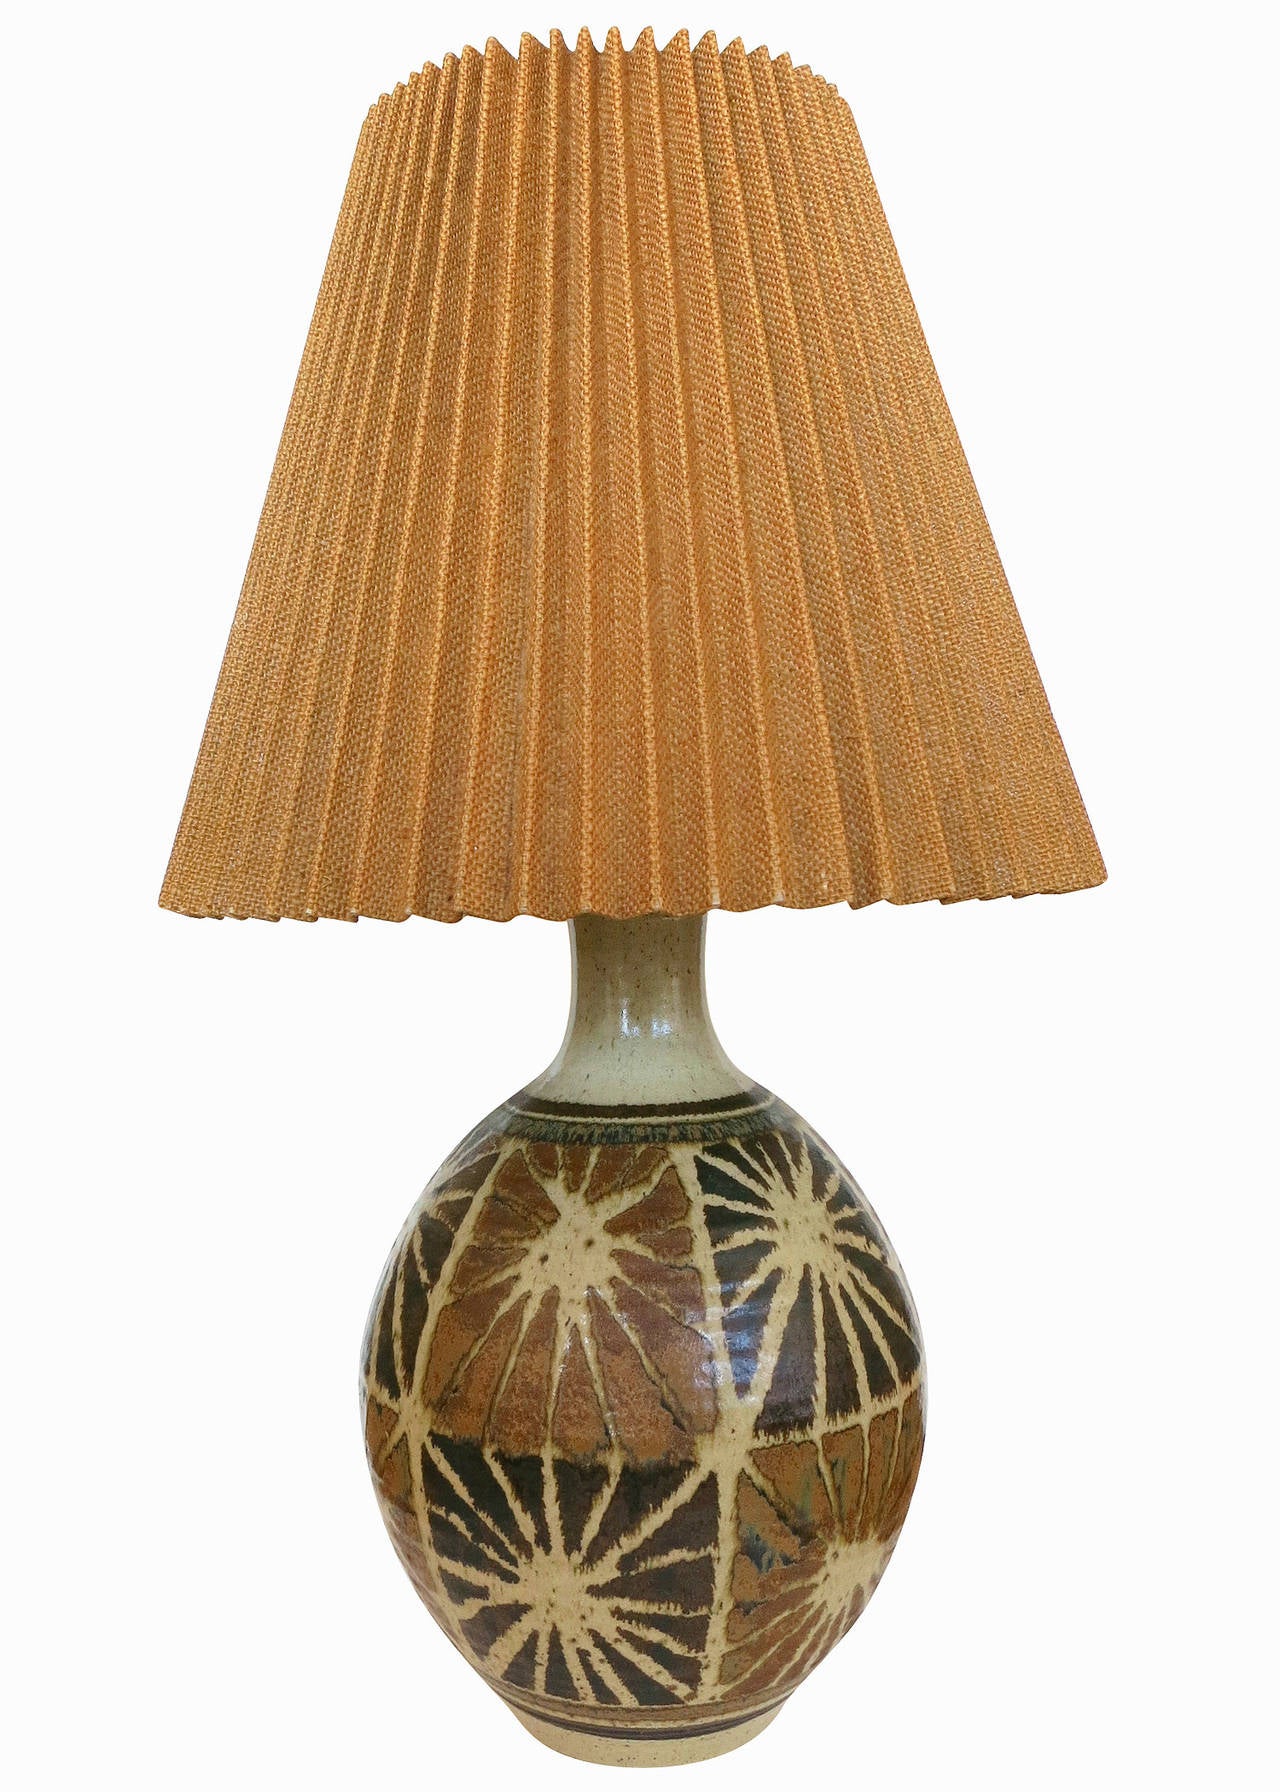 Circa 1950, this Modernist Starburst Art pottery lamp pair possesses a unique light brown starburst pattern that are accented with alternating shades of brown. The lamps were designed and made by San Diego based artist, Wishon-Harrell.

This set